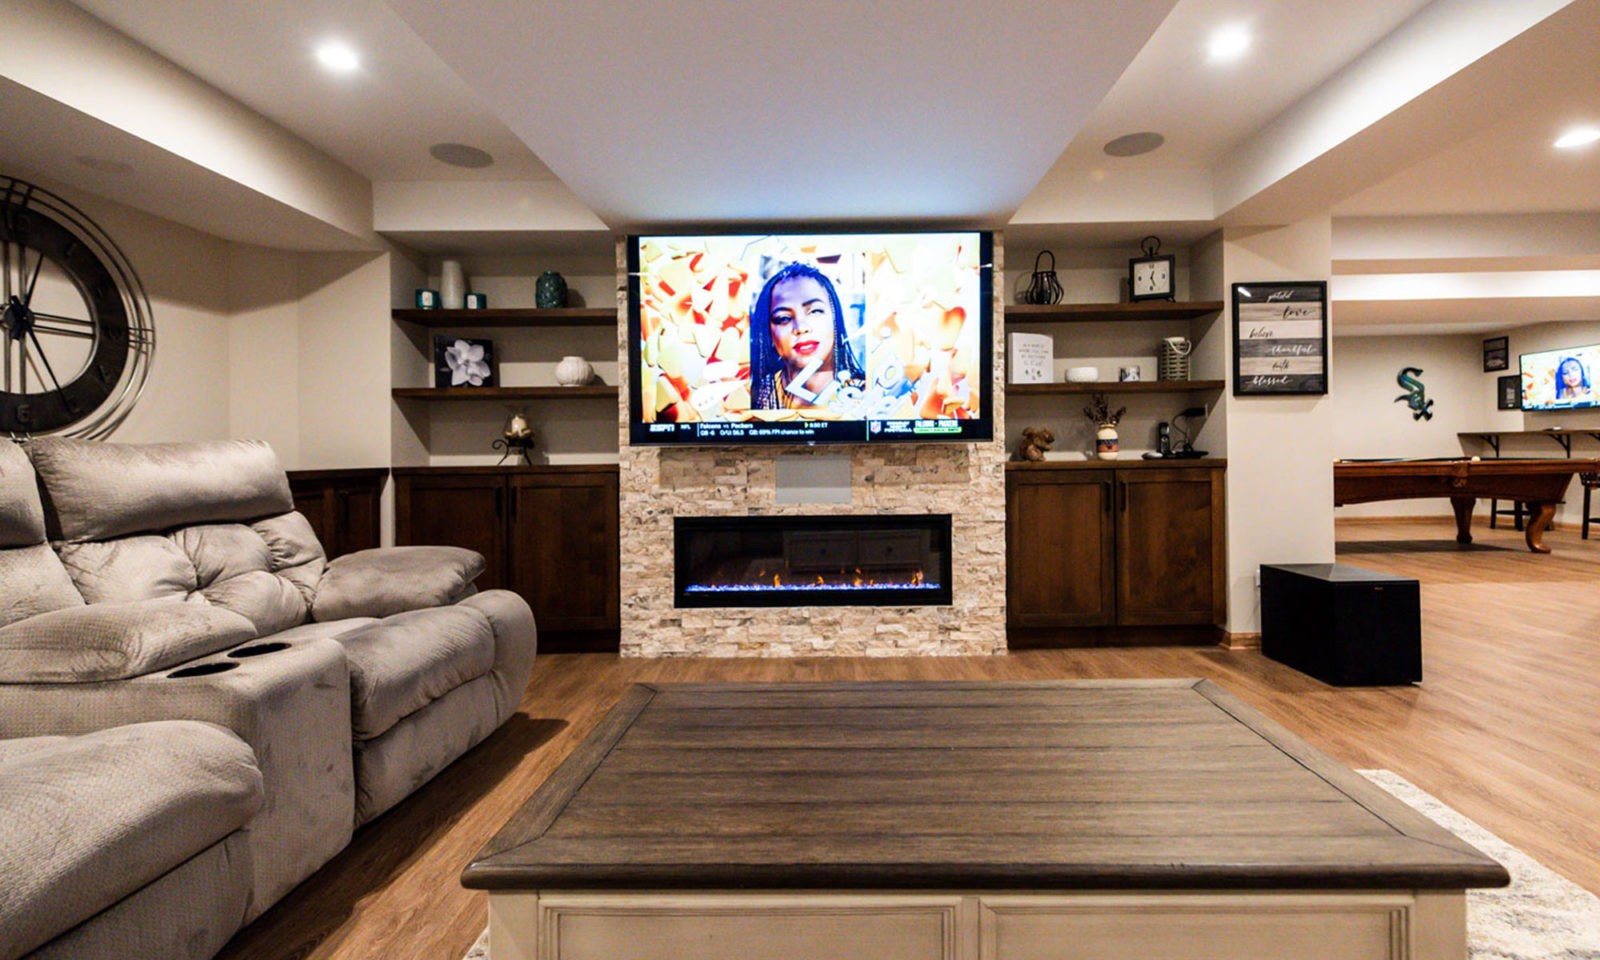 view of TV in basement theatre area